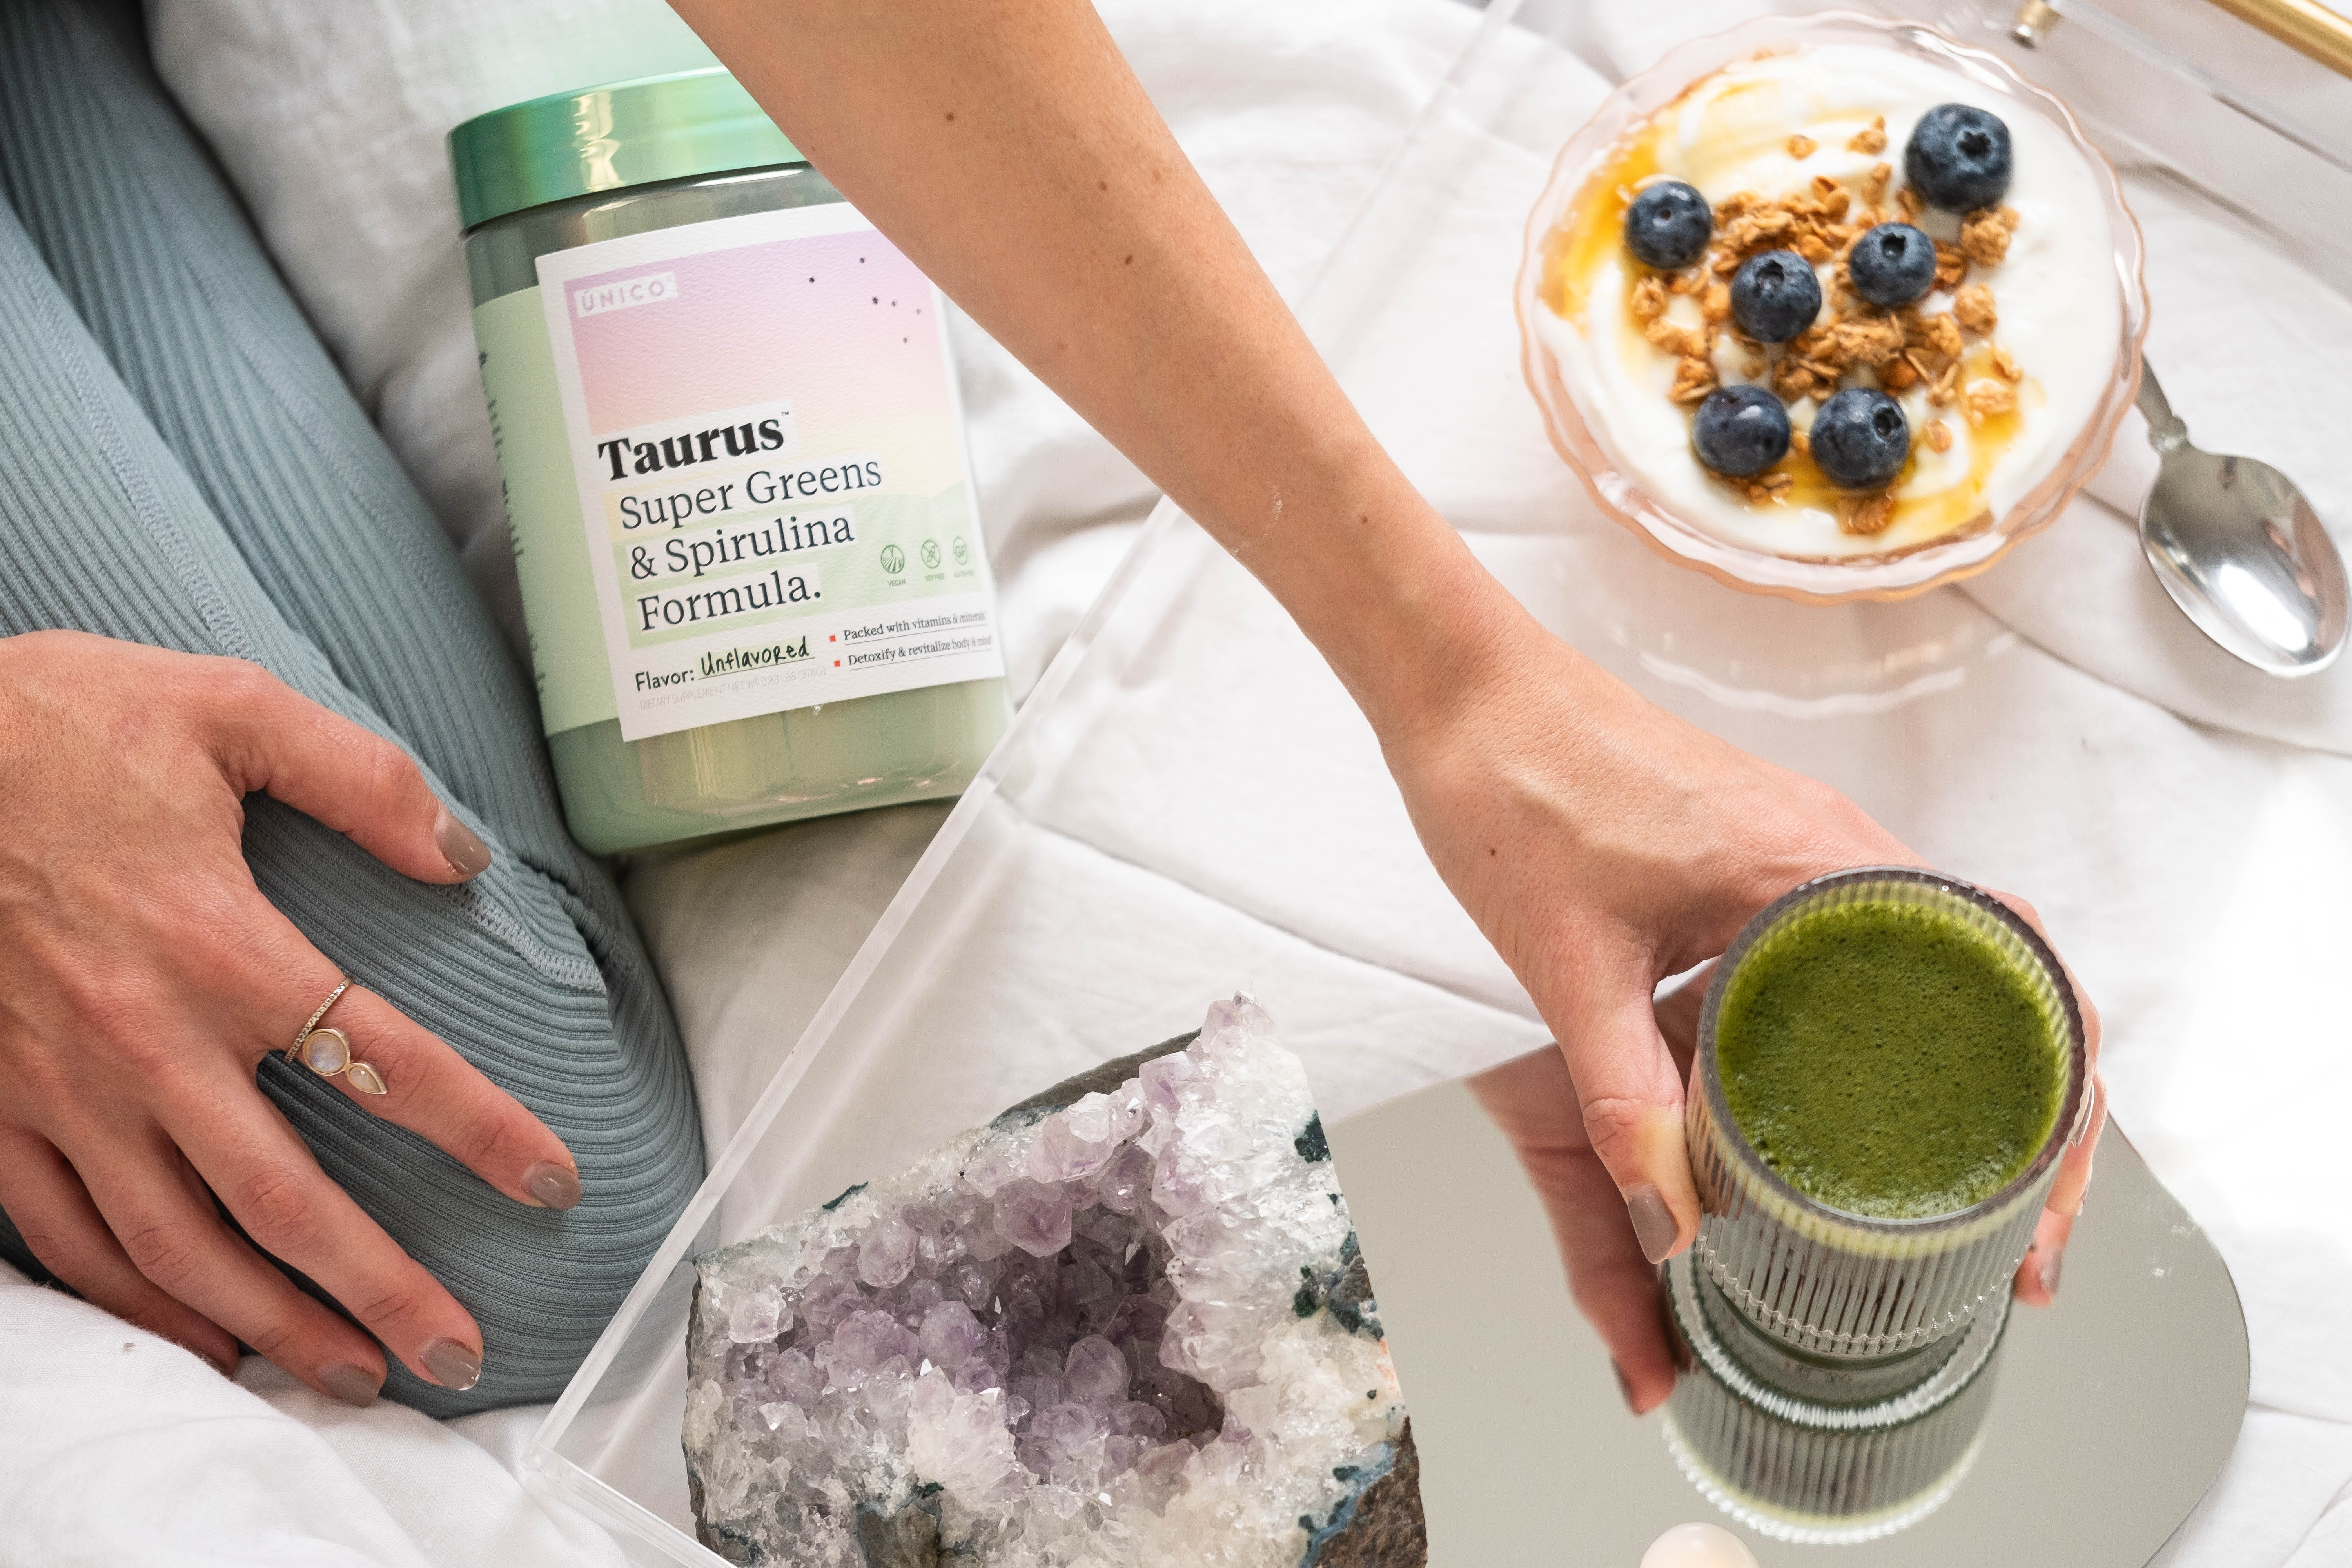 fit woman kneeling on bed, holding glass of algae superfood greens drink